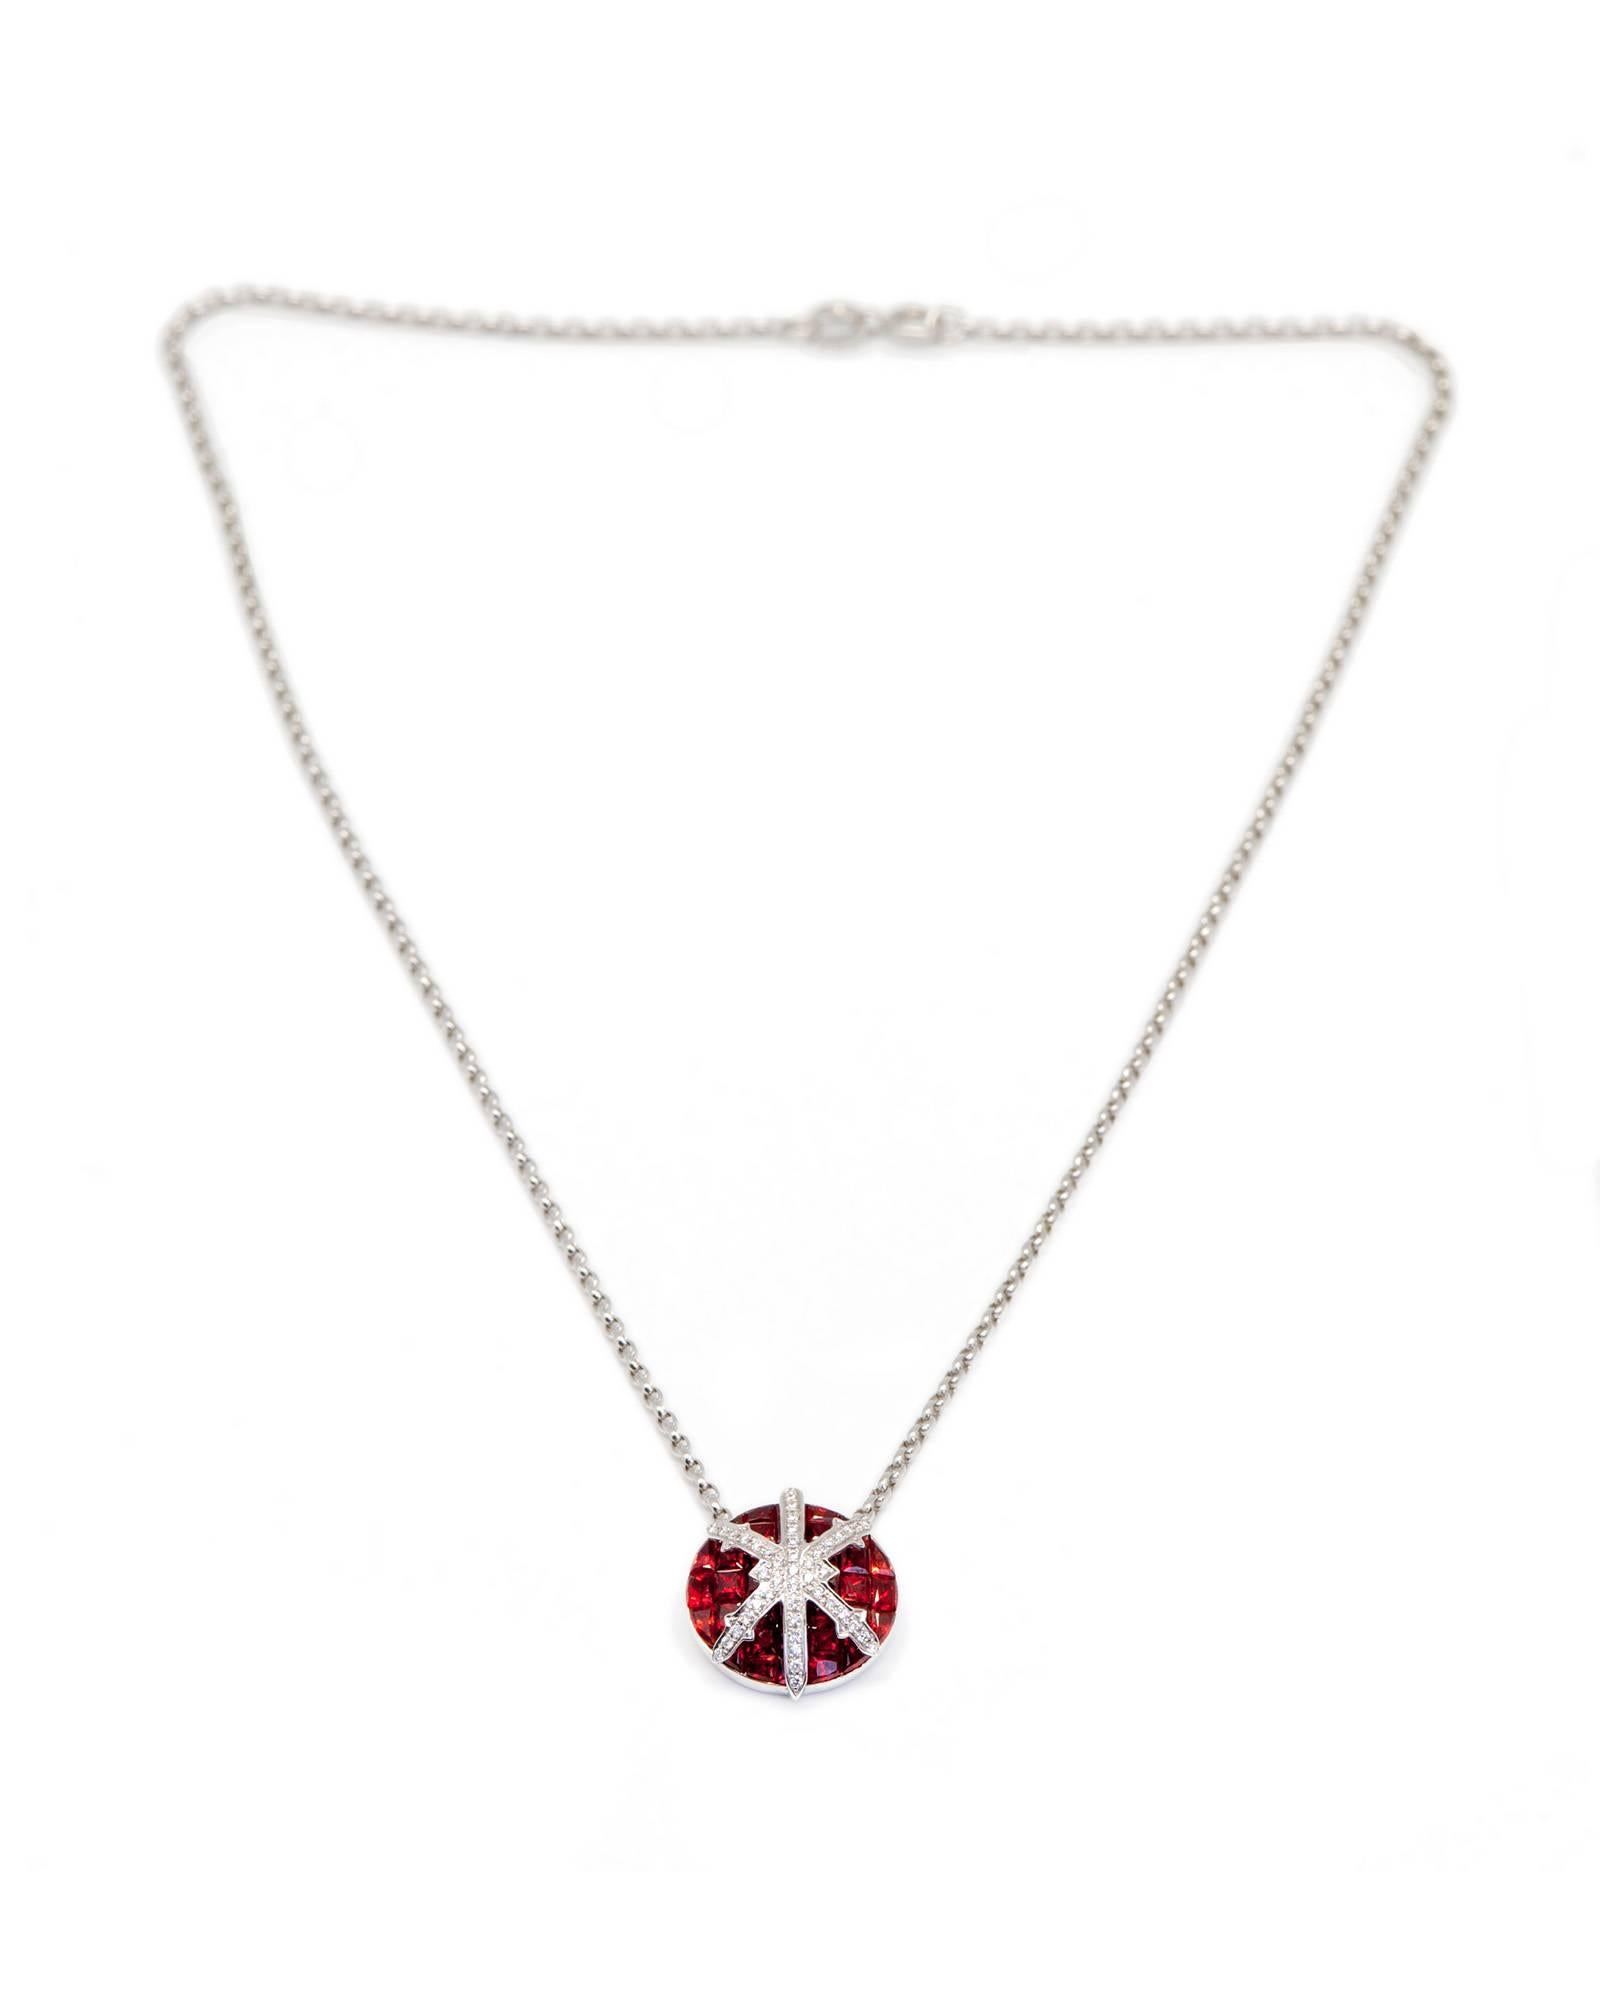 The STENMARK ruby, diamond and 18 karat white gold pendant features the elegant gemstone setting technique where square cut stones are set without metal prongs, creating a jewel with high colour impact. Banded with a jeweled snowflake of 45 x 1 mm G